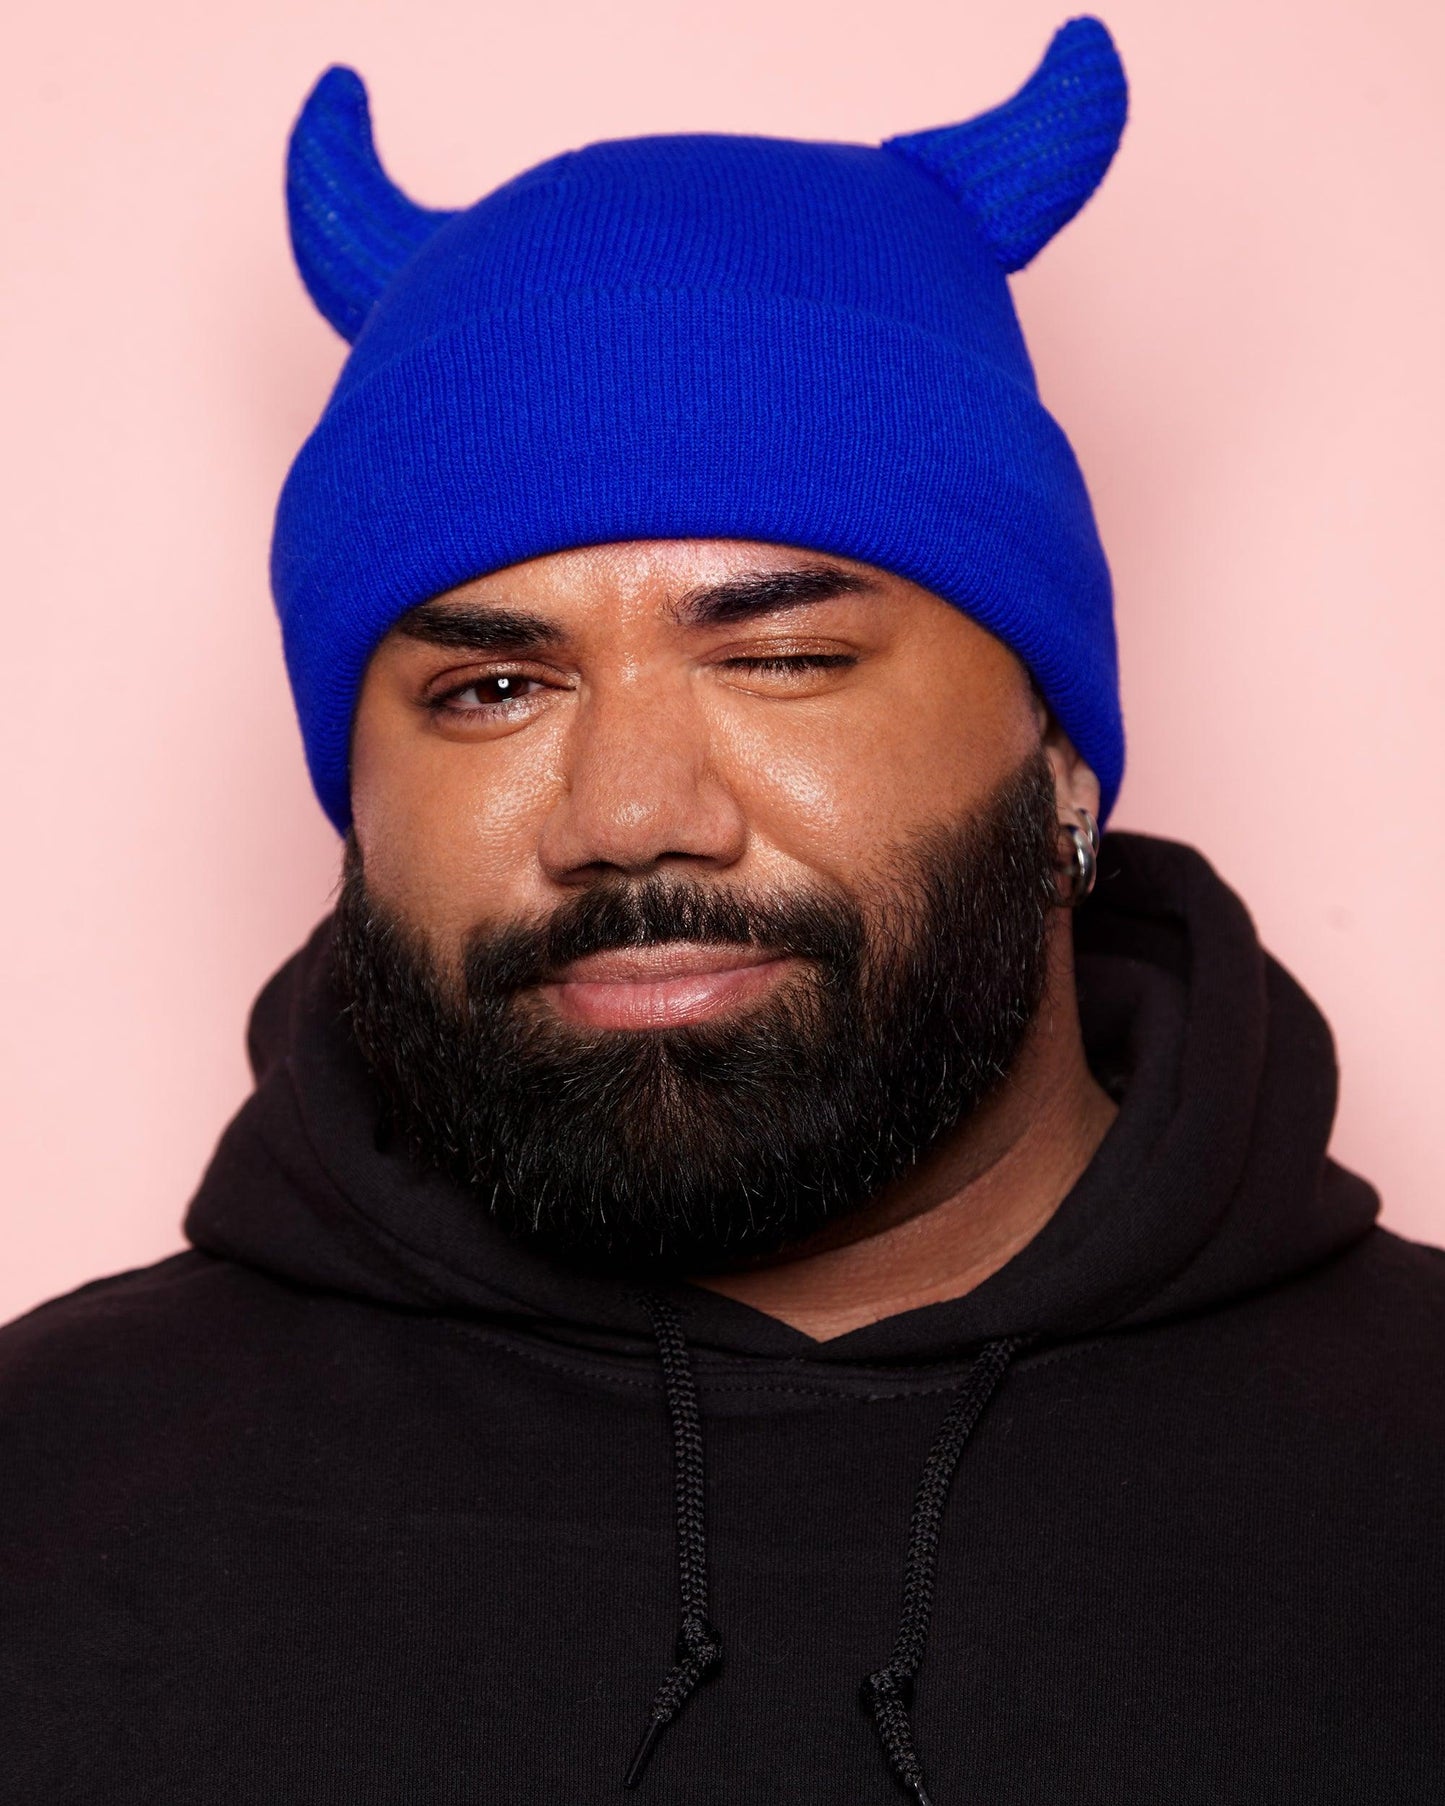 Devilish beanie - blue | One size fits all.